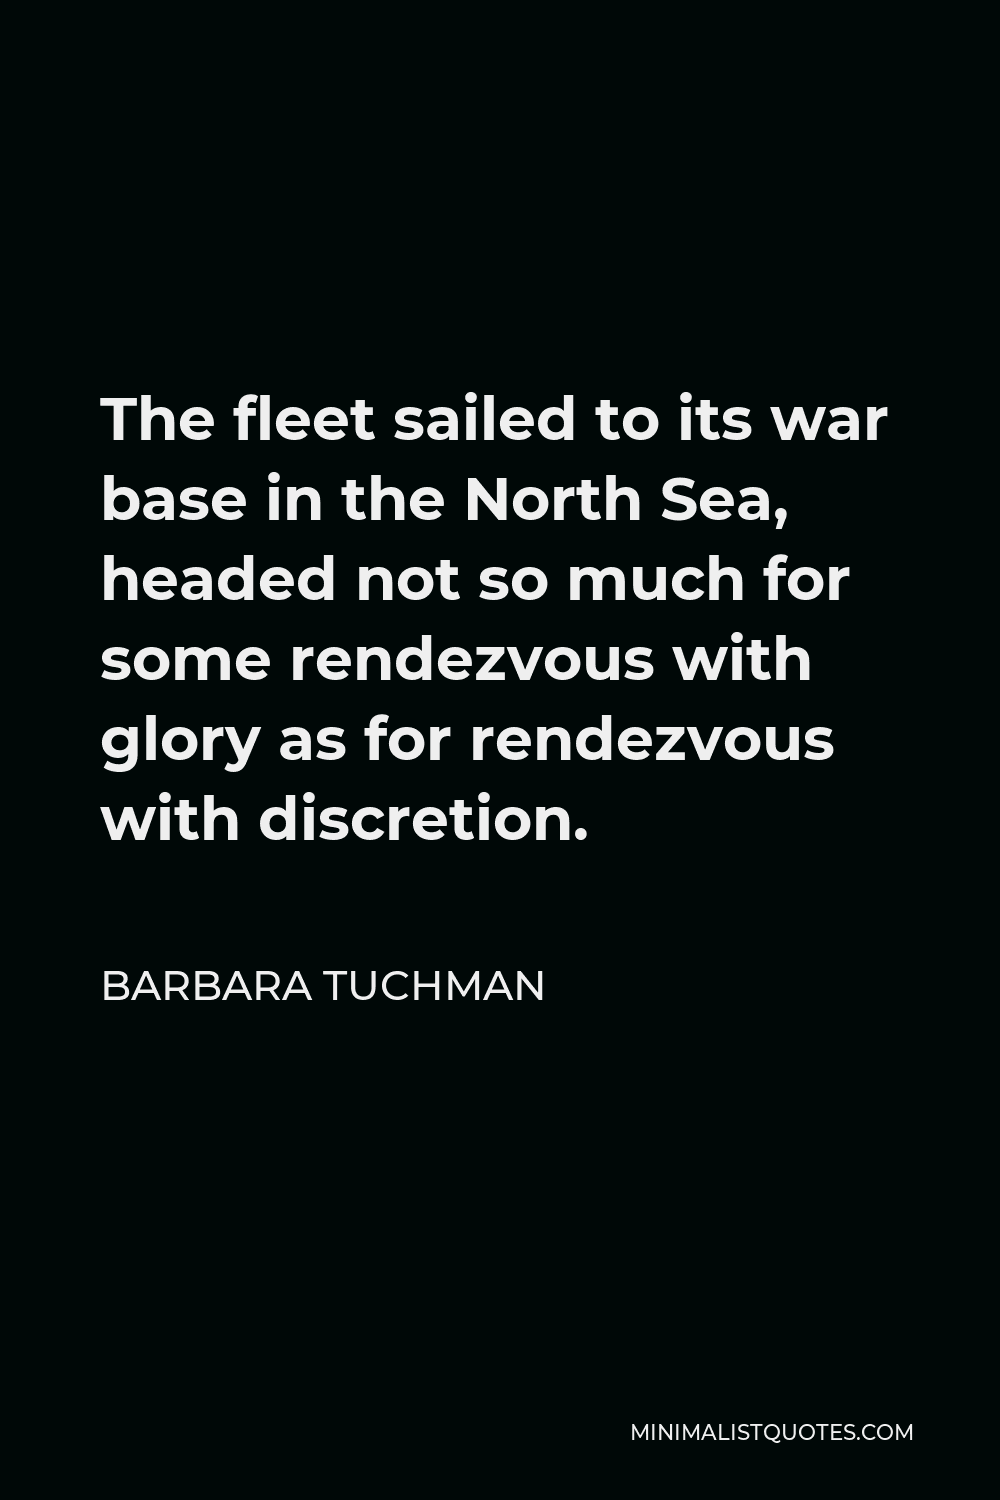 Barbara Tuchman Quote - The fleet sailed to its war base in the North Sea, headed not so much for some rendezvous with glory as for rendezvous with discretion.